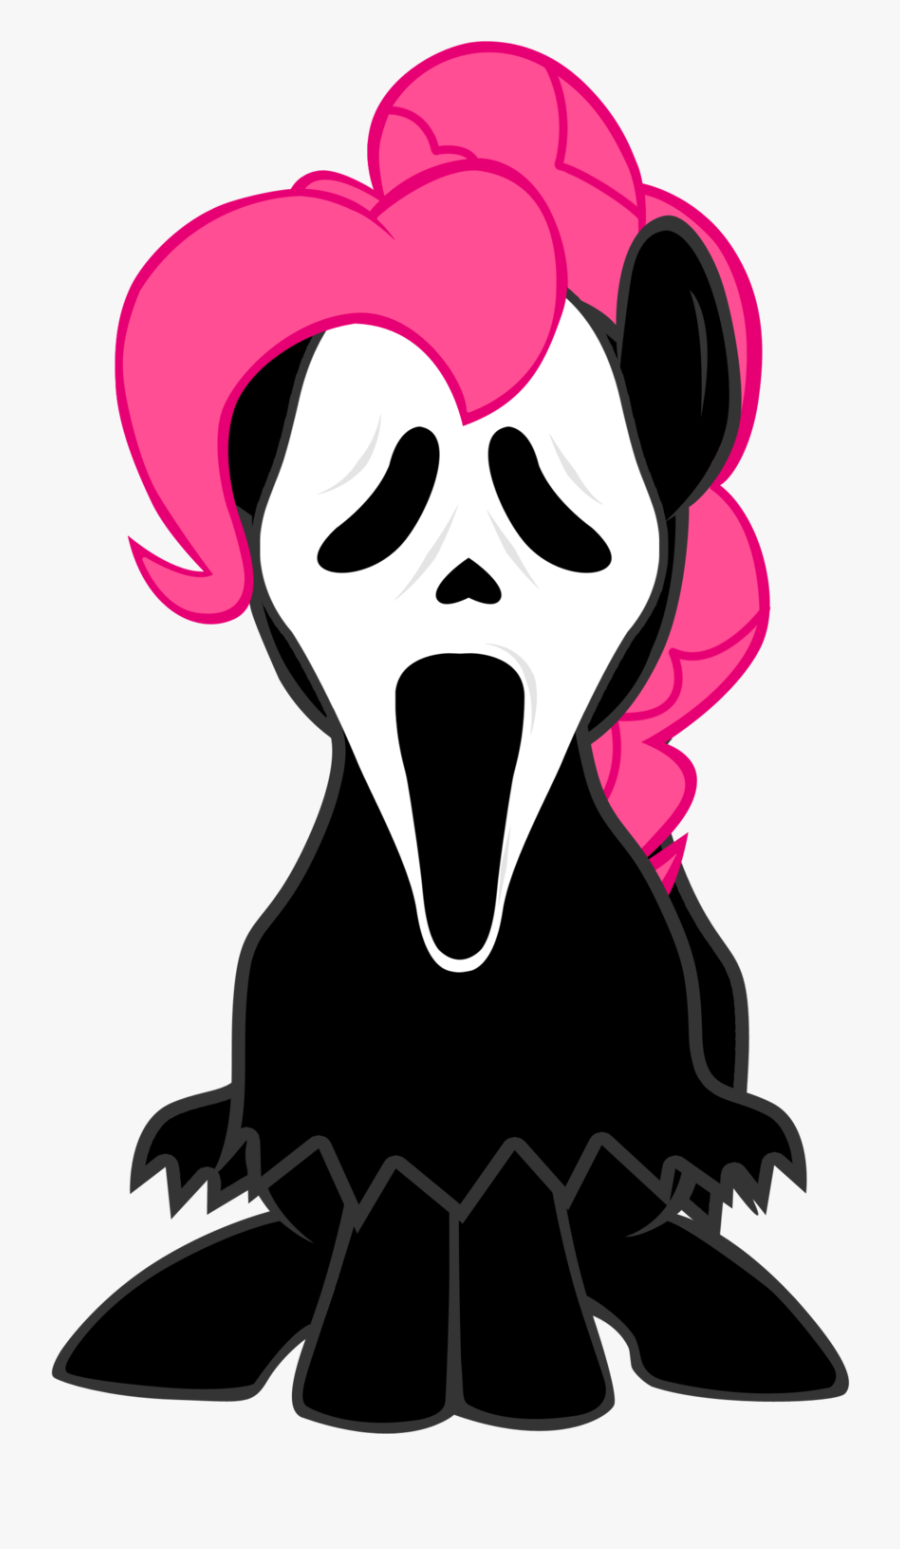 Scary Ghost Faces - Scary Ghost Face Cartoon, Transparent Clipart